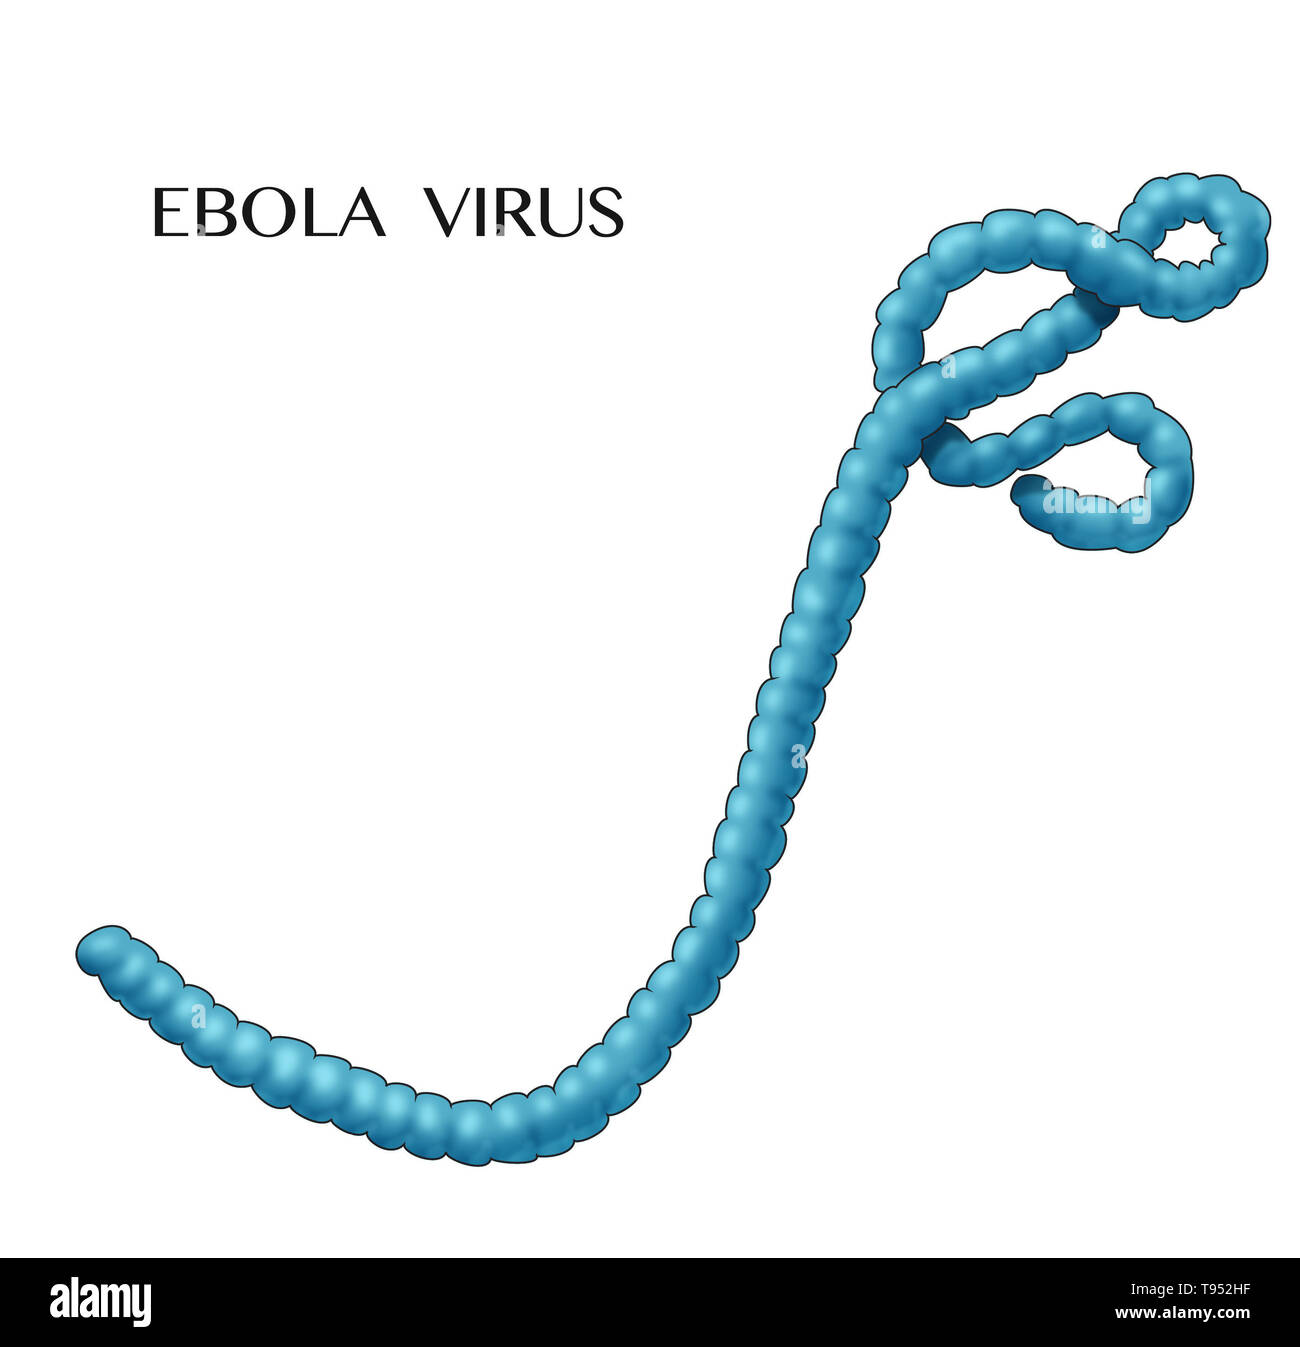 Illustration of the Ebola virus. Ebola causes a severe and often fatal hemorrhagic fever in humans and other mammals, known as Ebola virus disease. Stock Photo